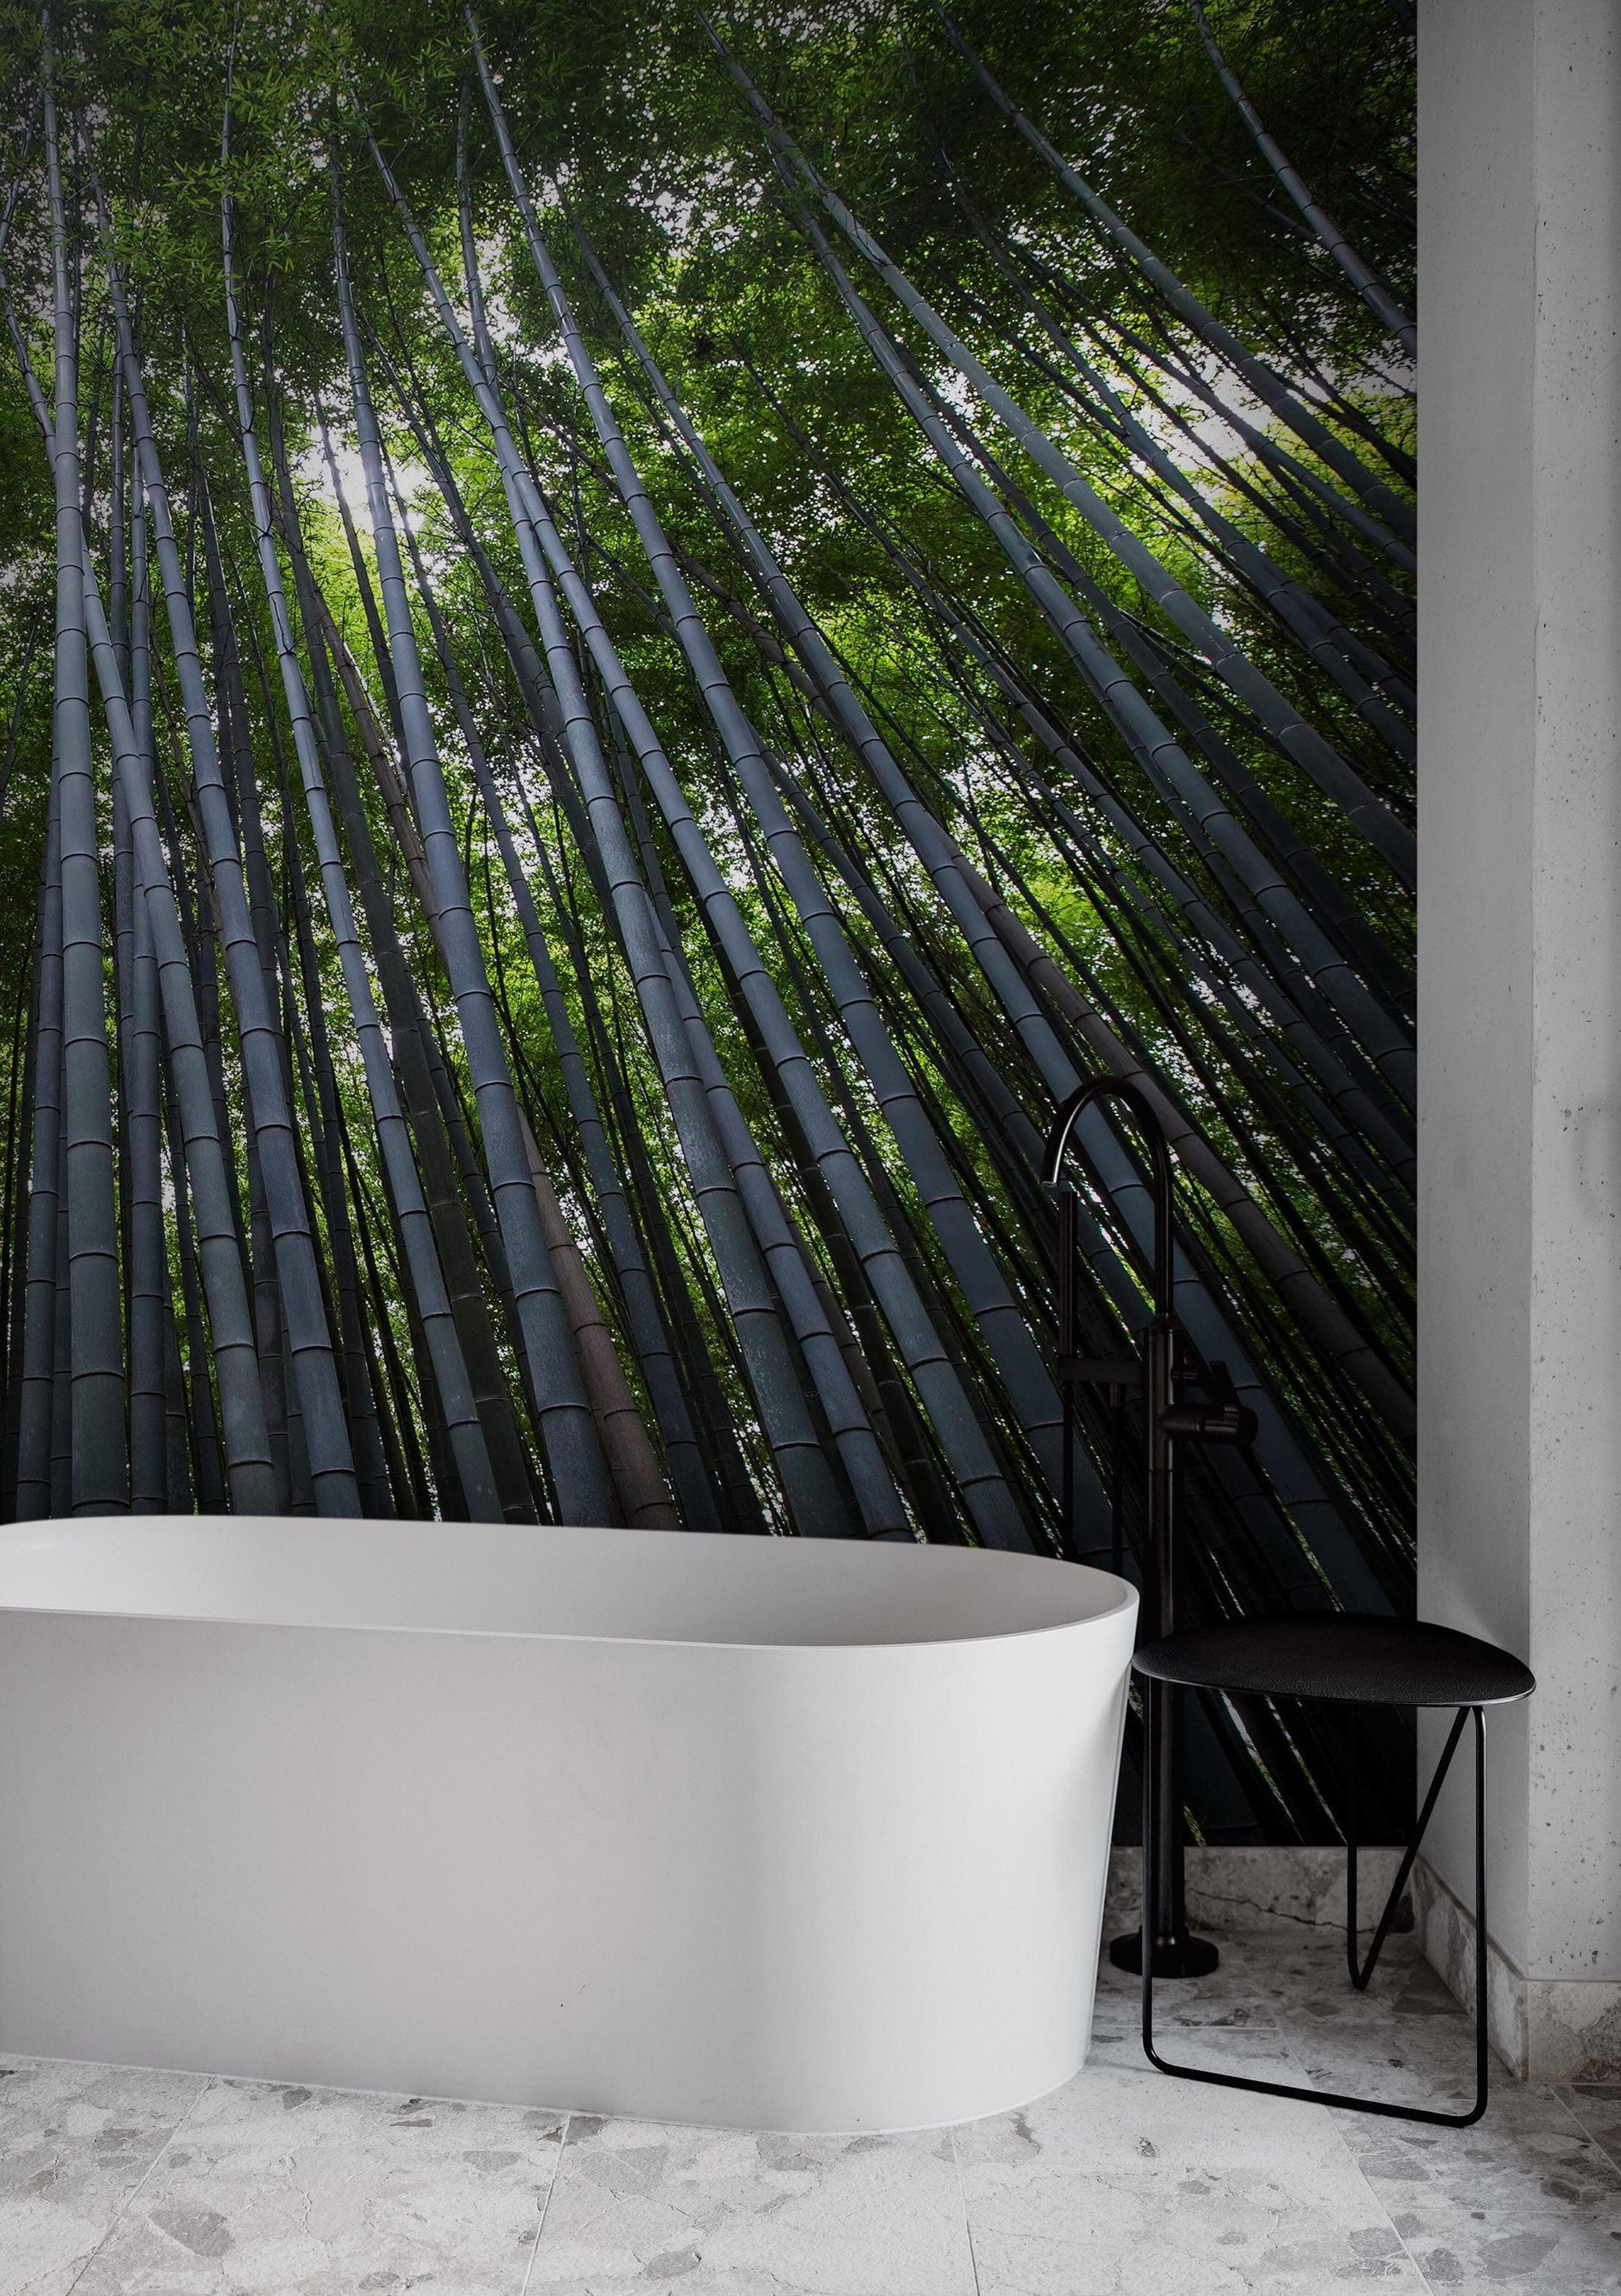 Japanese Bamboo Forest Wallpaper Peel and Stick Wall Mural. Peaceful,  Serenity, Zen Background Wallpaper. Japan Theme Wall Decor. 6043 